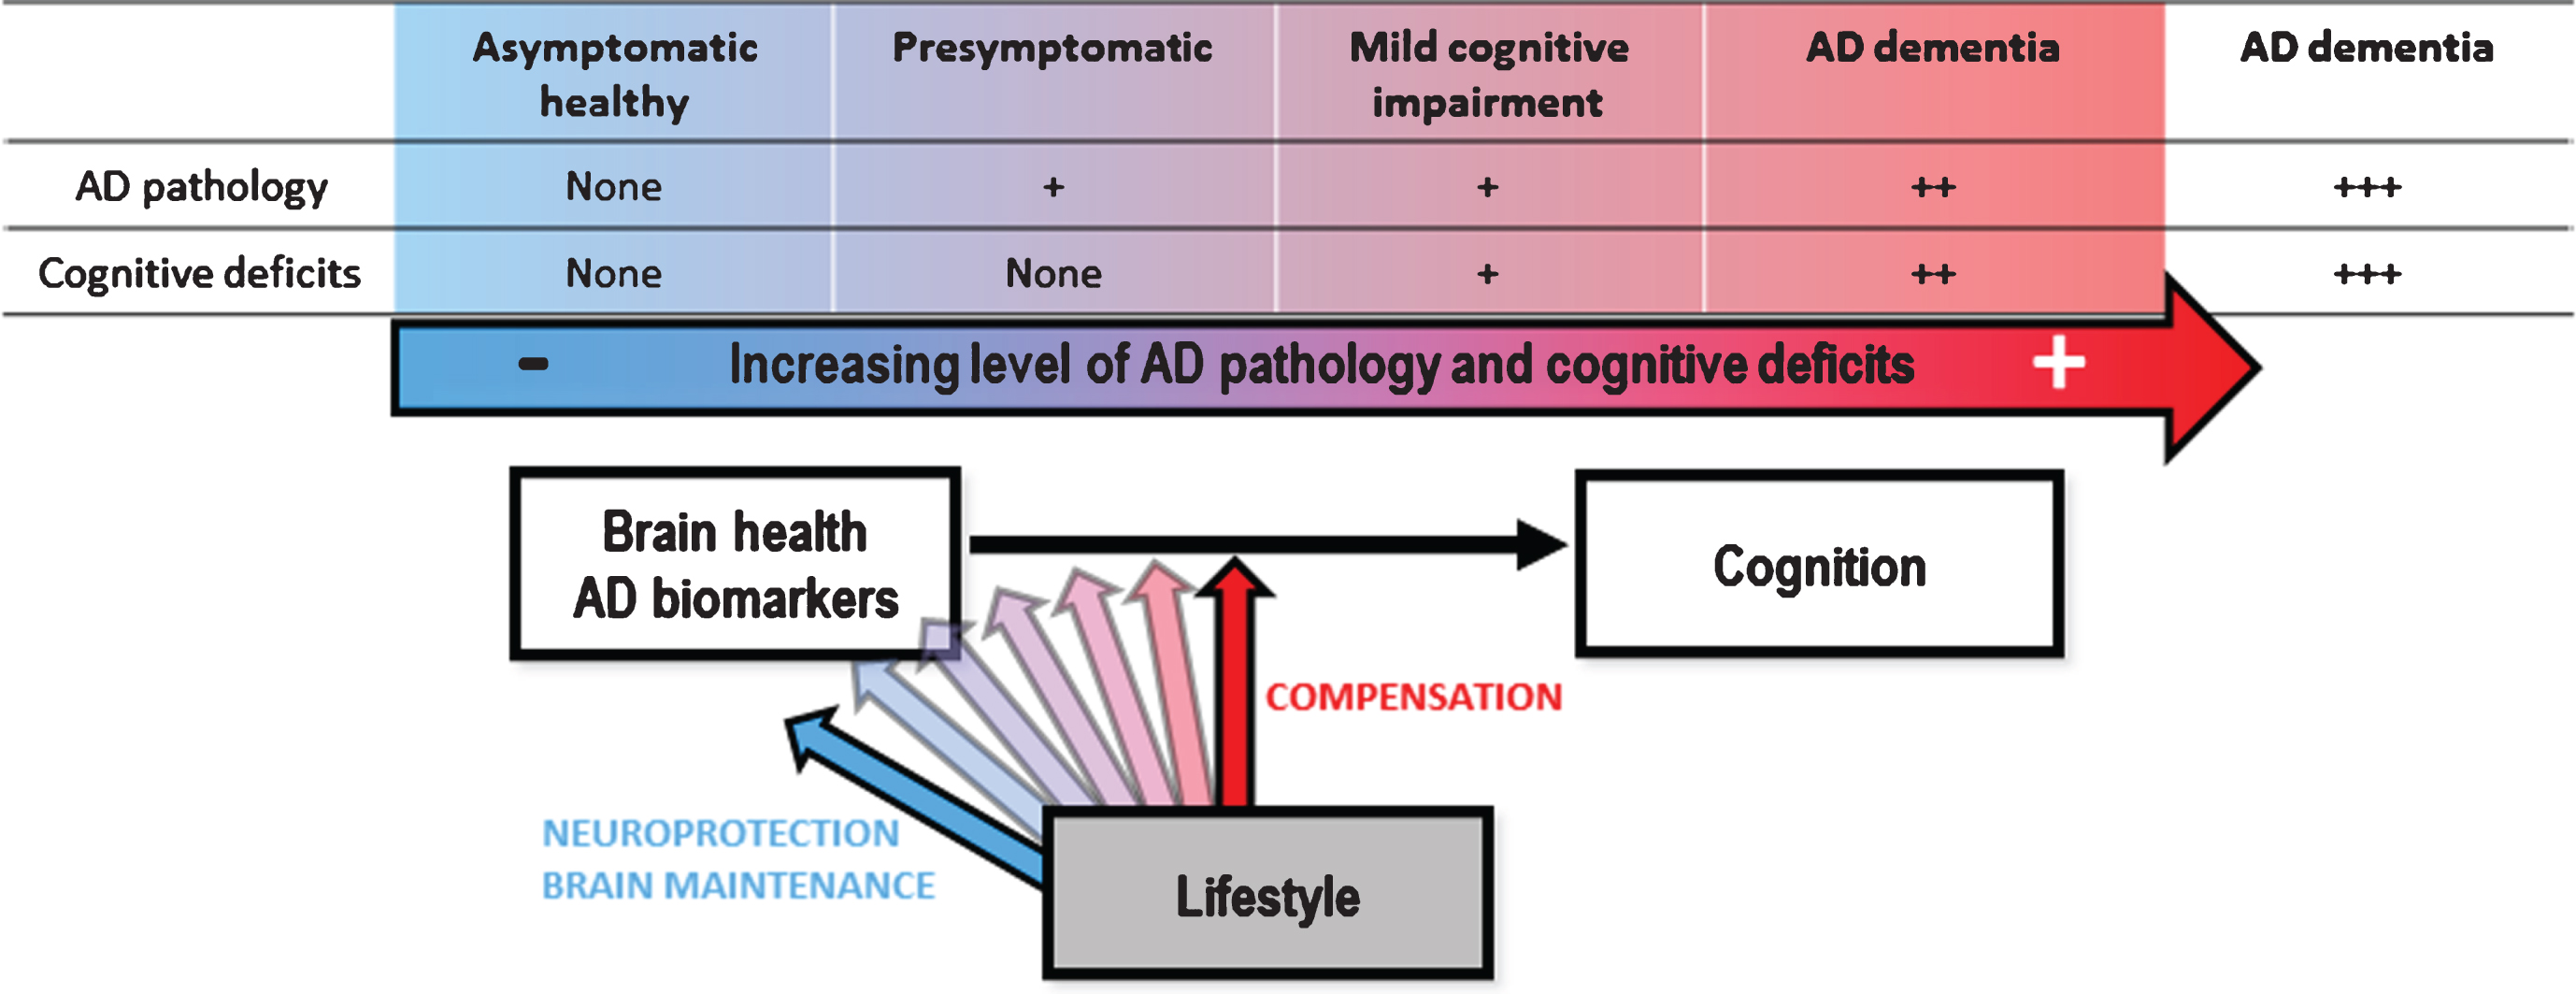 Schematic theoretical representation of the differential expression of reserve mechanisms (neuroprotection versus compensation) across the spectrum from cognitively normal healthy adults to AD dementia. We propose that neuroprotection and brain maintenance predominates in healthy elderly while compensation processes predominate as AD progresses to dementia (probably up to a certain stage where compensation is not possible anymore). [54, 55].